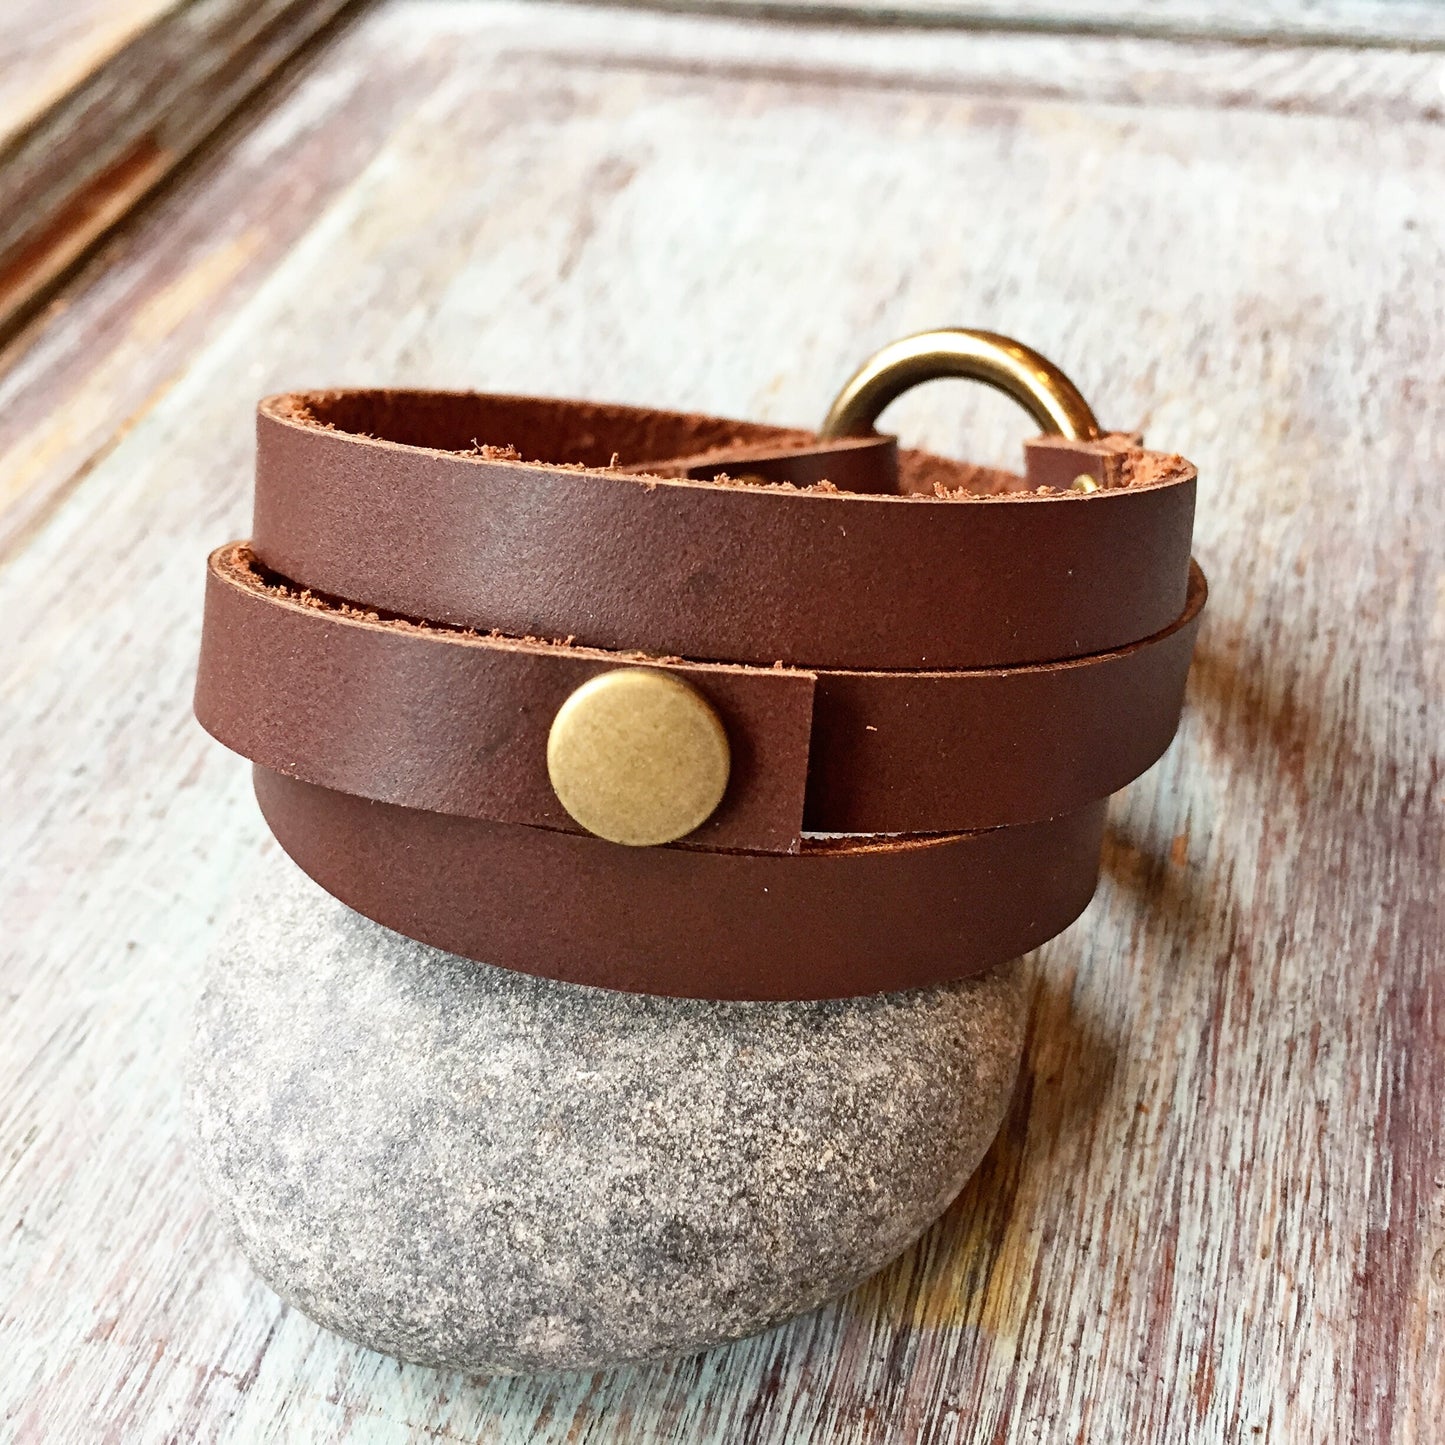 Leather wrap bracelet, Womens leather wrap bracelet, Leather wrap bracelet for women, Bracelet for women, Leather jewelry, Anniversary gift